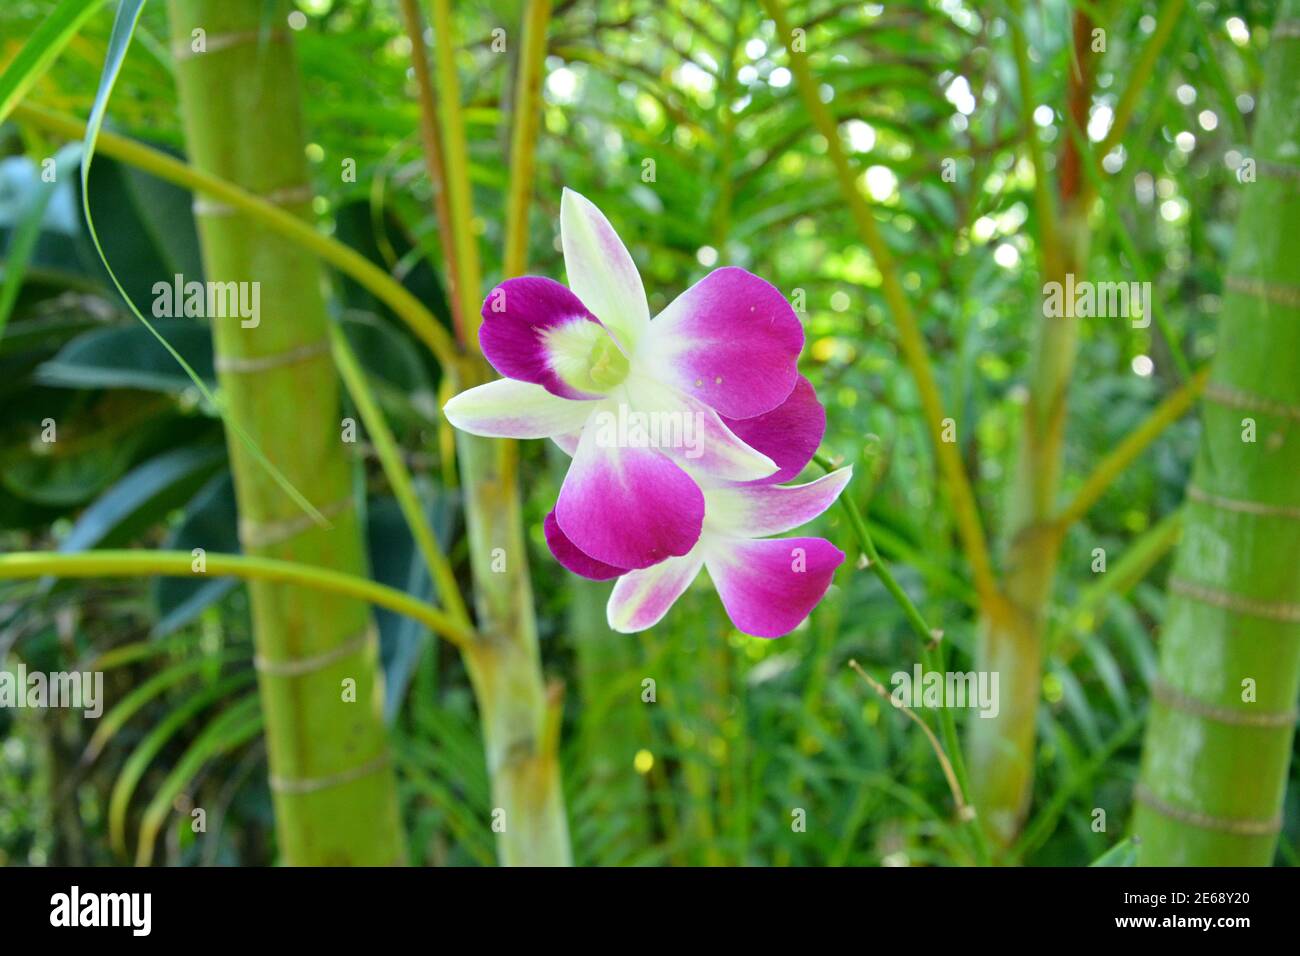 pink phalaenopsis blossoms with white stamens in the bush Stock Photo